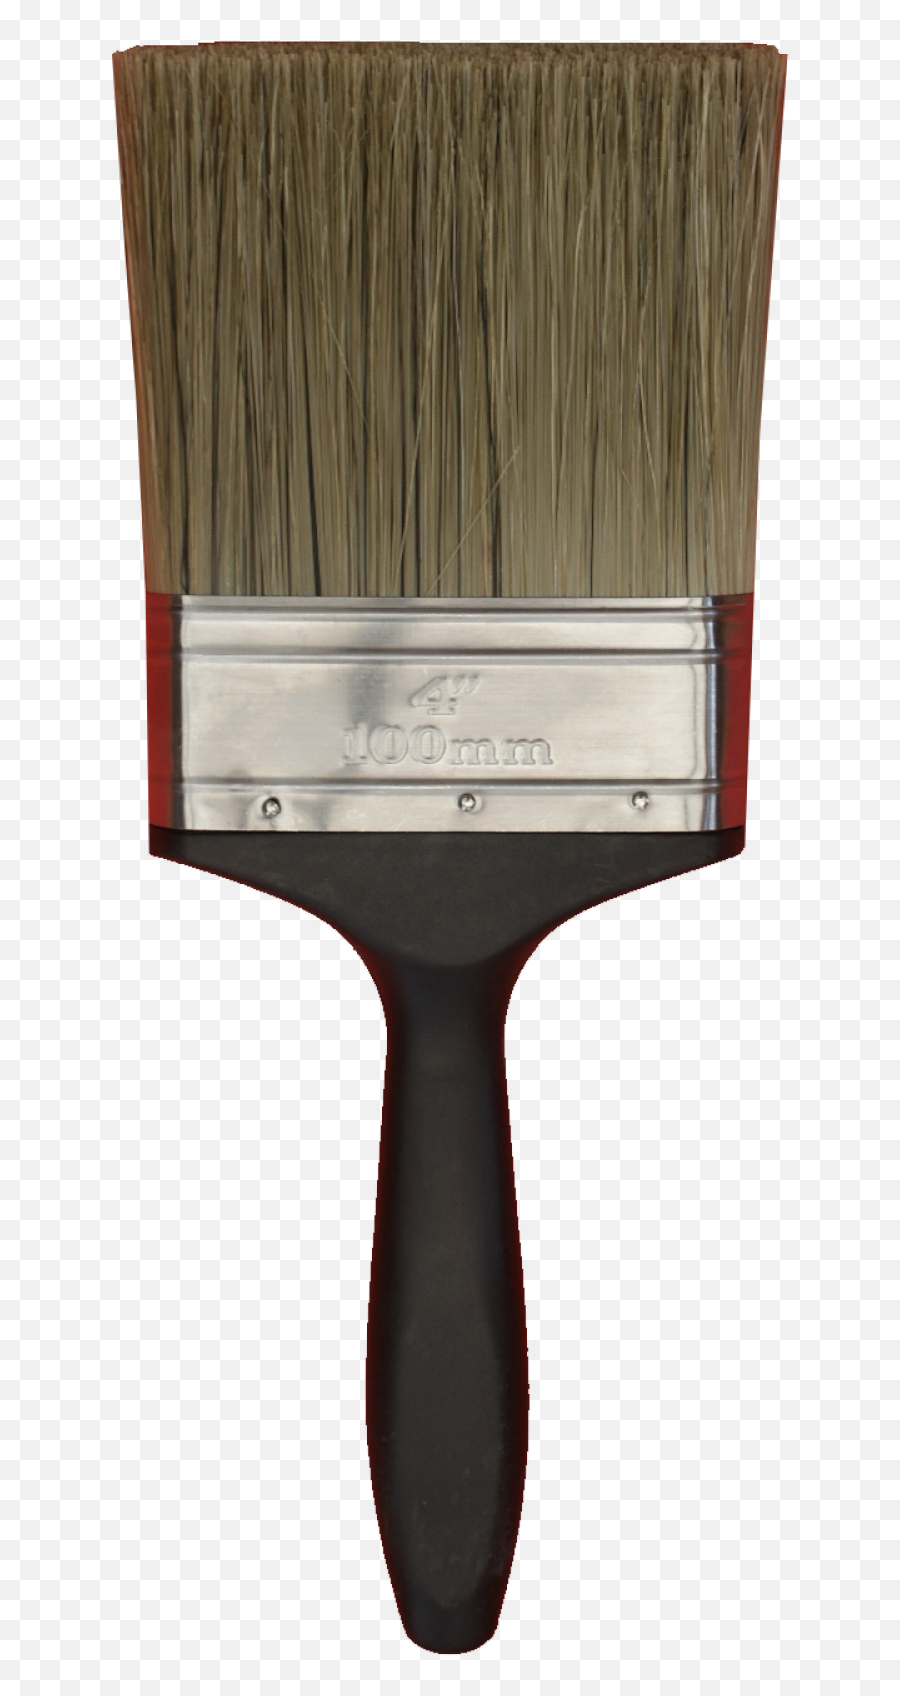 Paint Brush Png Image - Hd Png Images Of Brush,Paint Brush Png Transparent